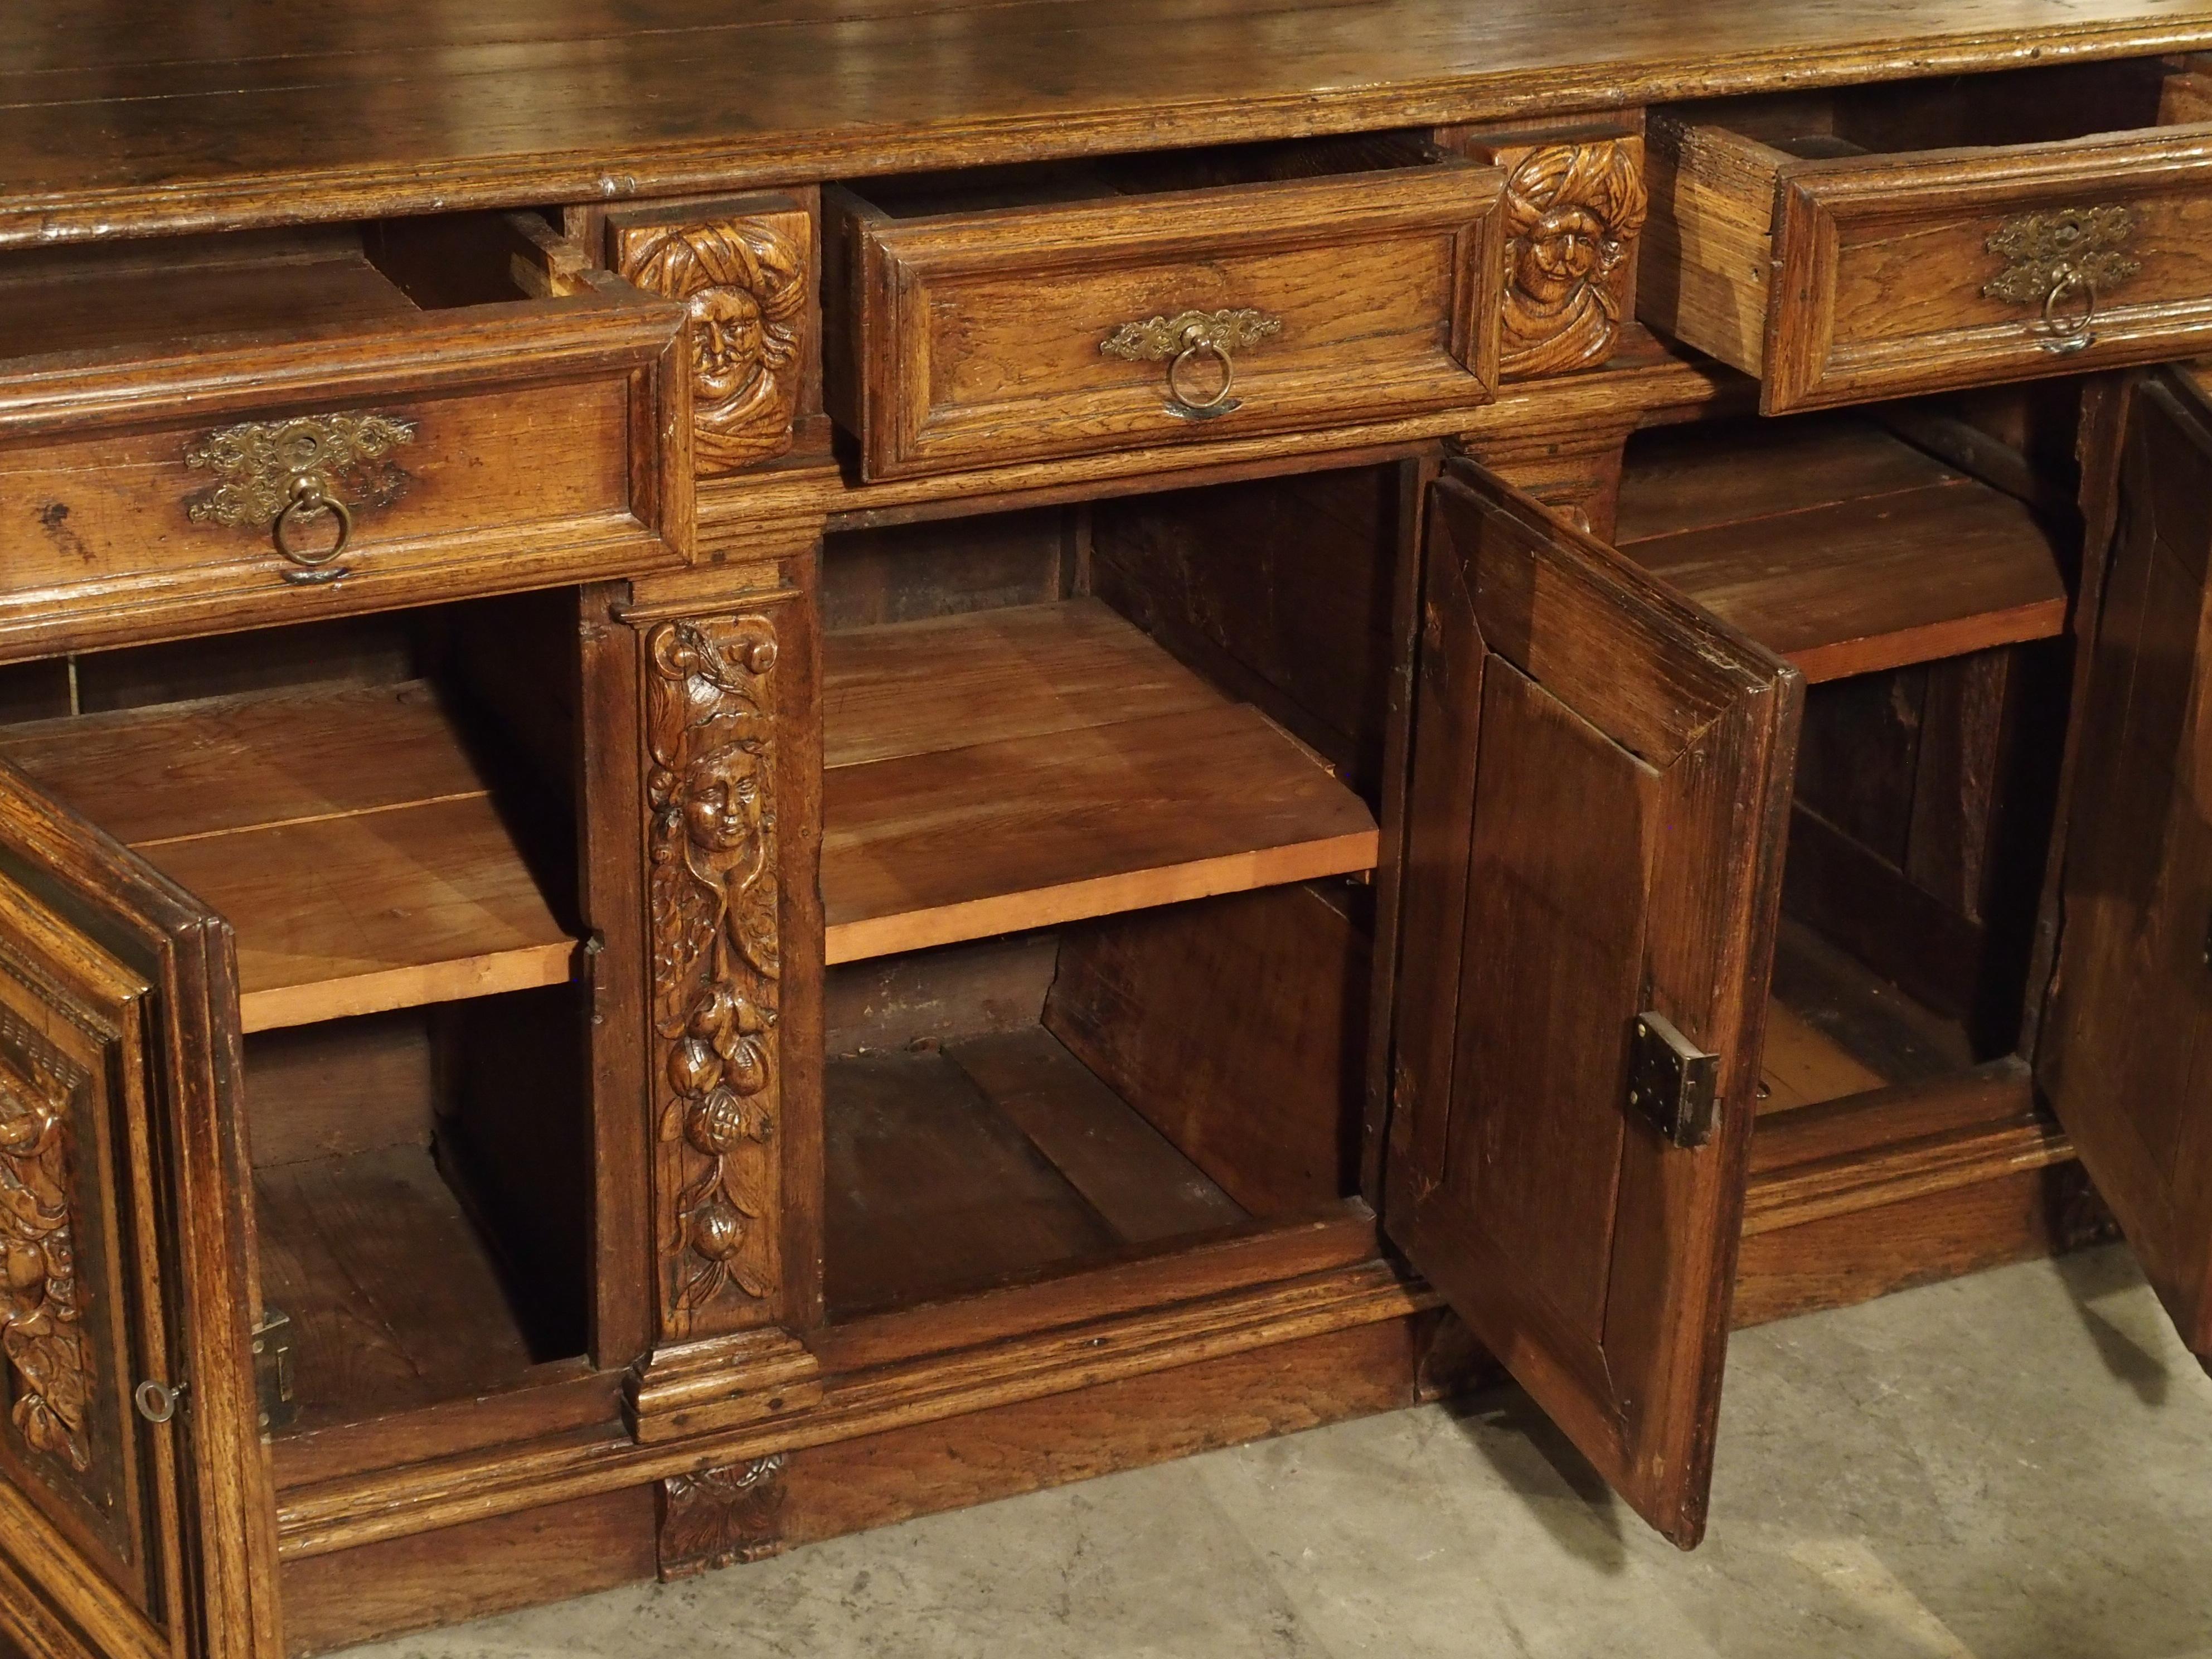 Rare 17th Century Oak Enfilade with Tortoiseshell and Ebony Inlays For Sale 2